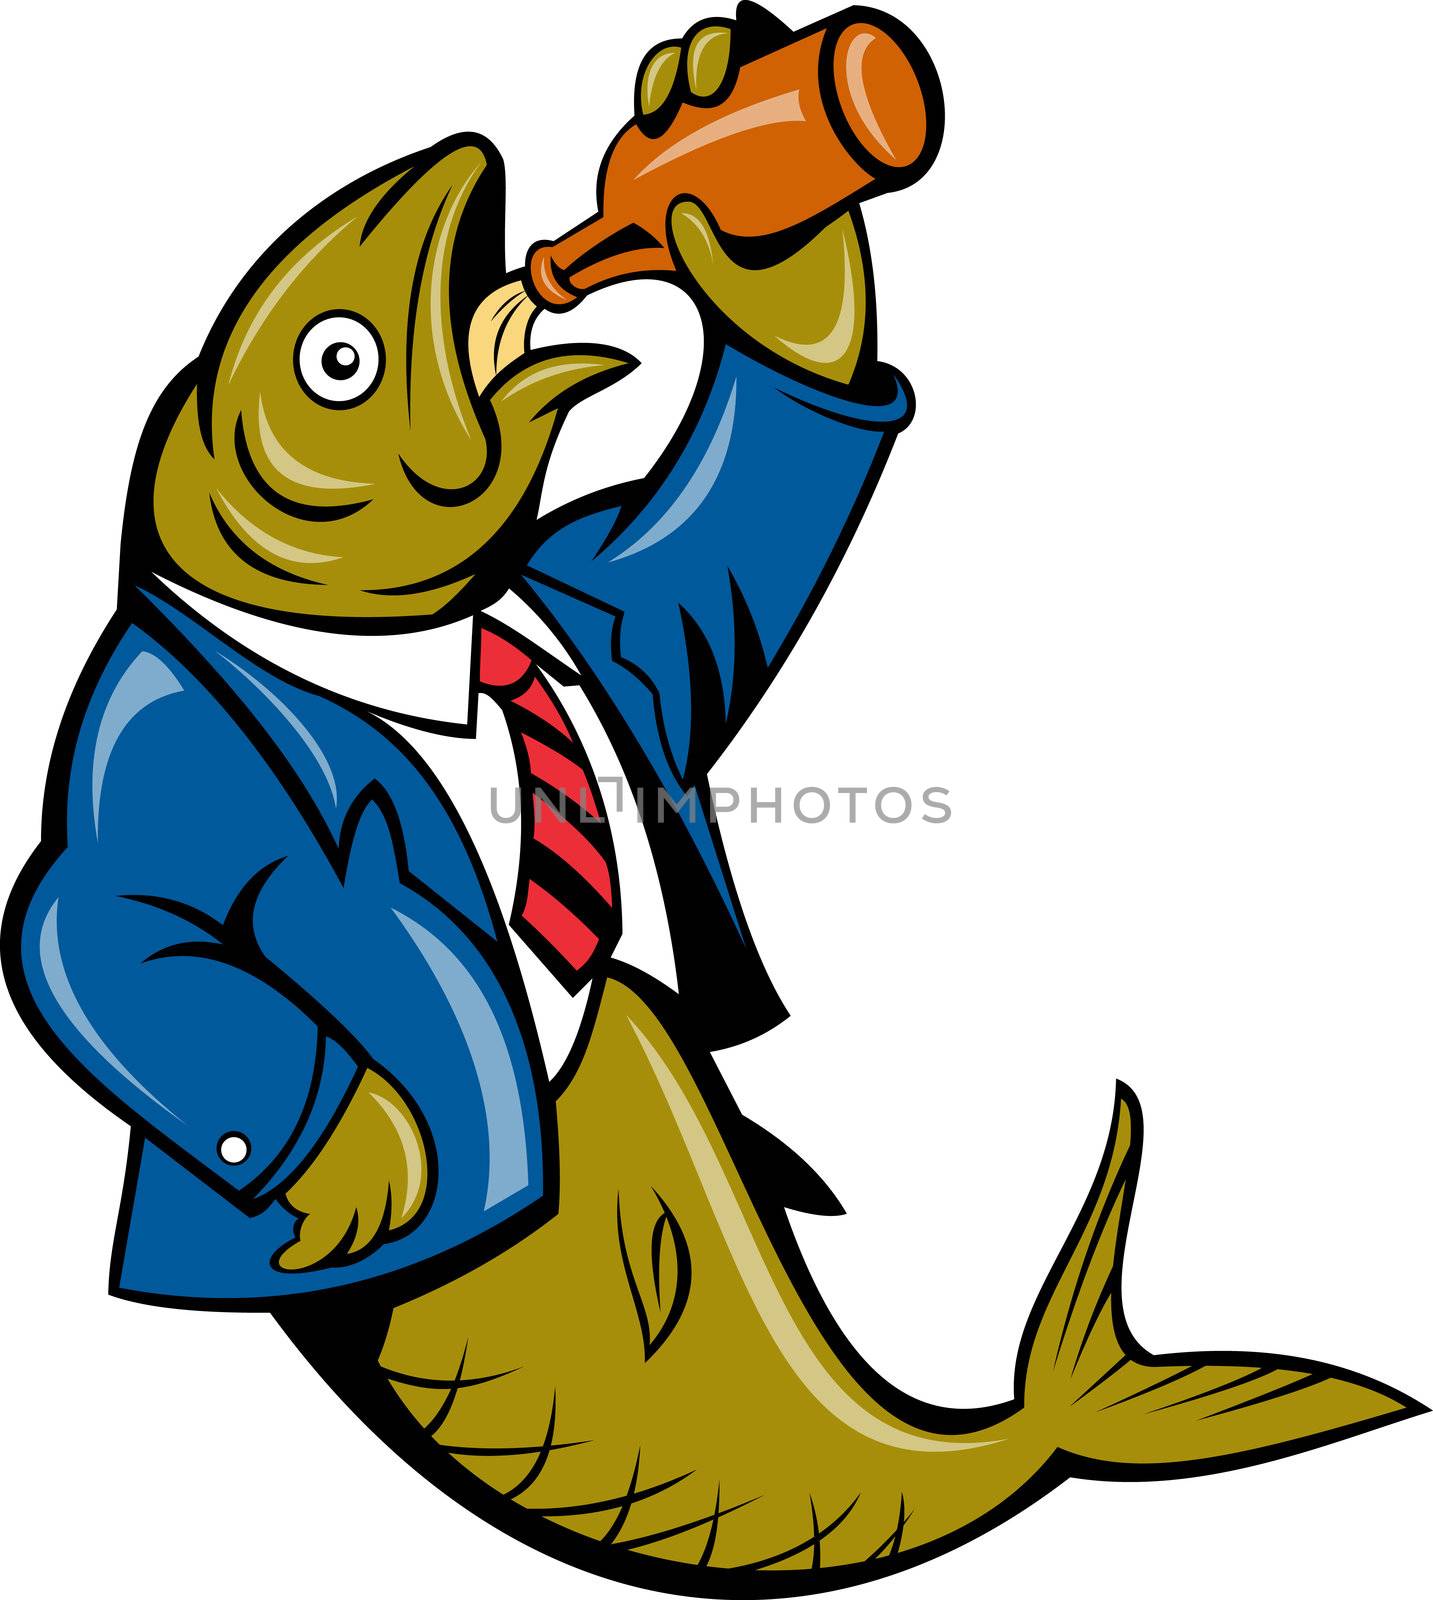 Herring fish business suit drinking beer bottle by patrimonio